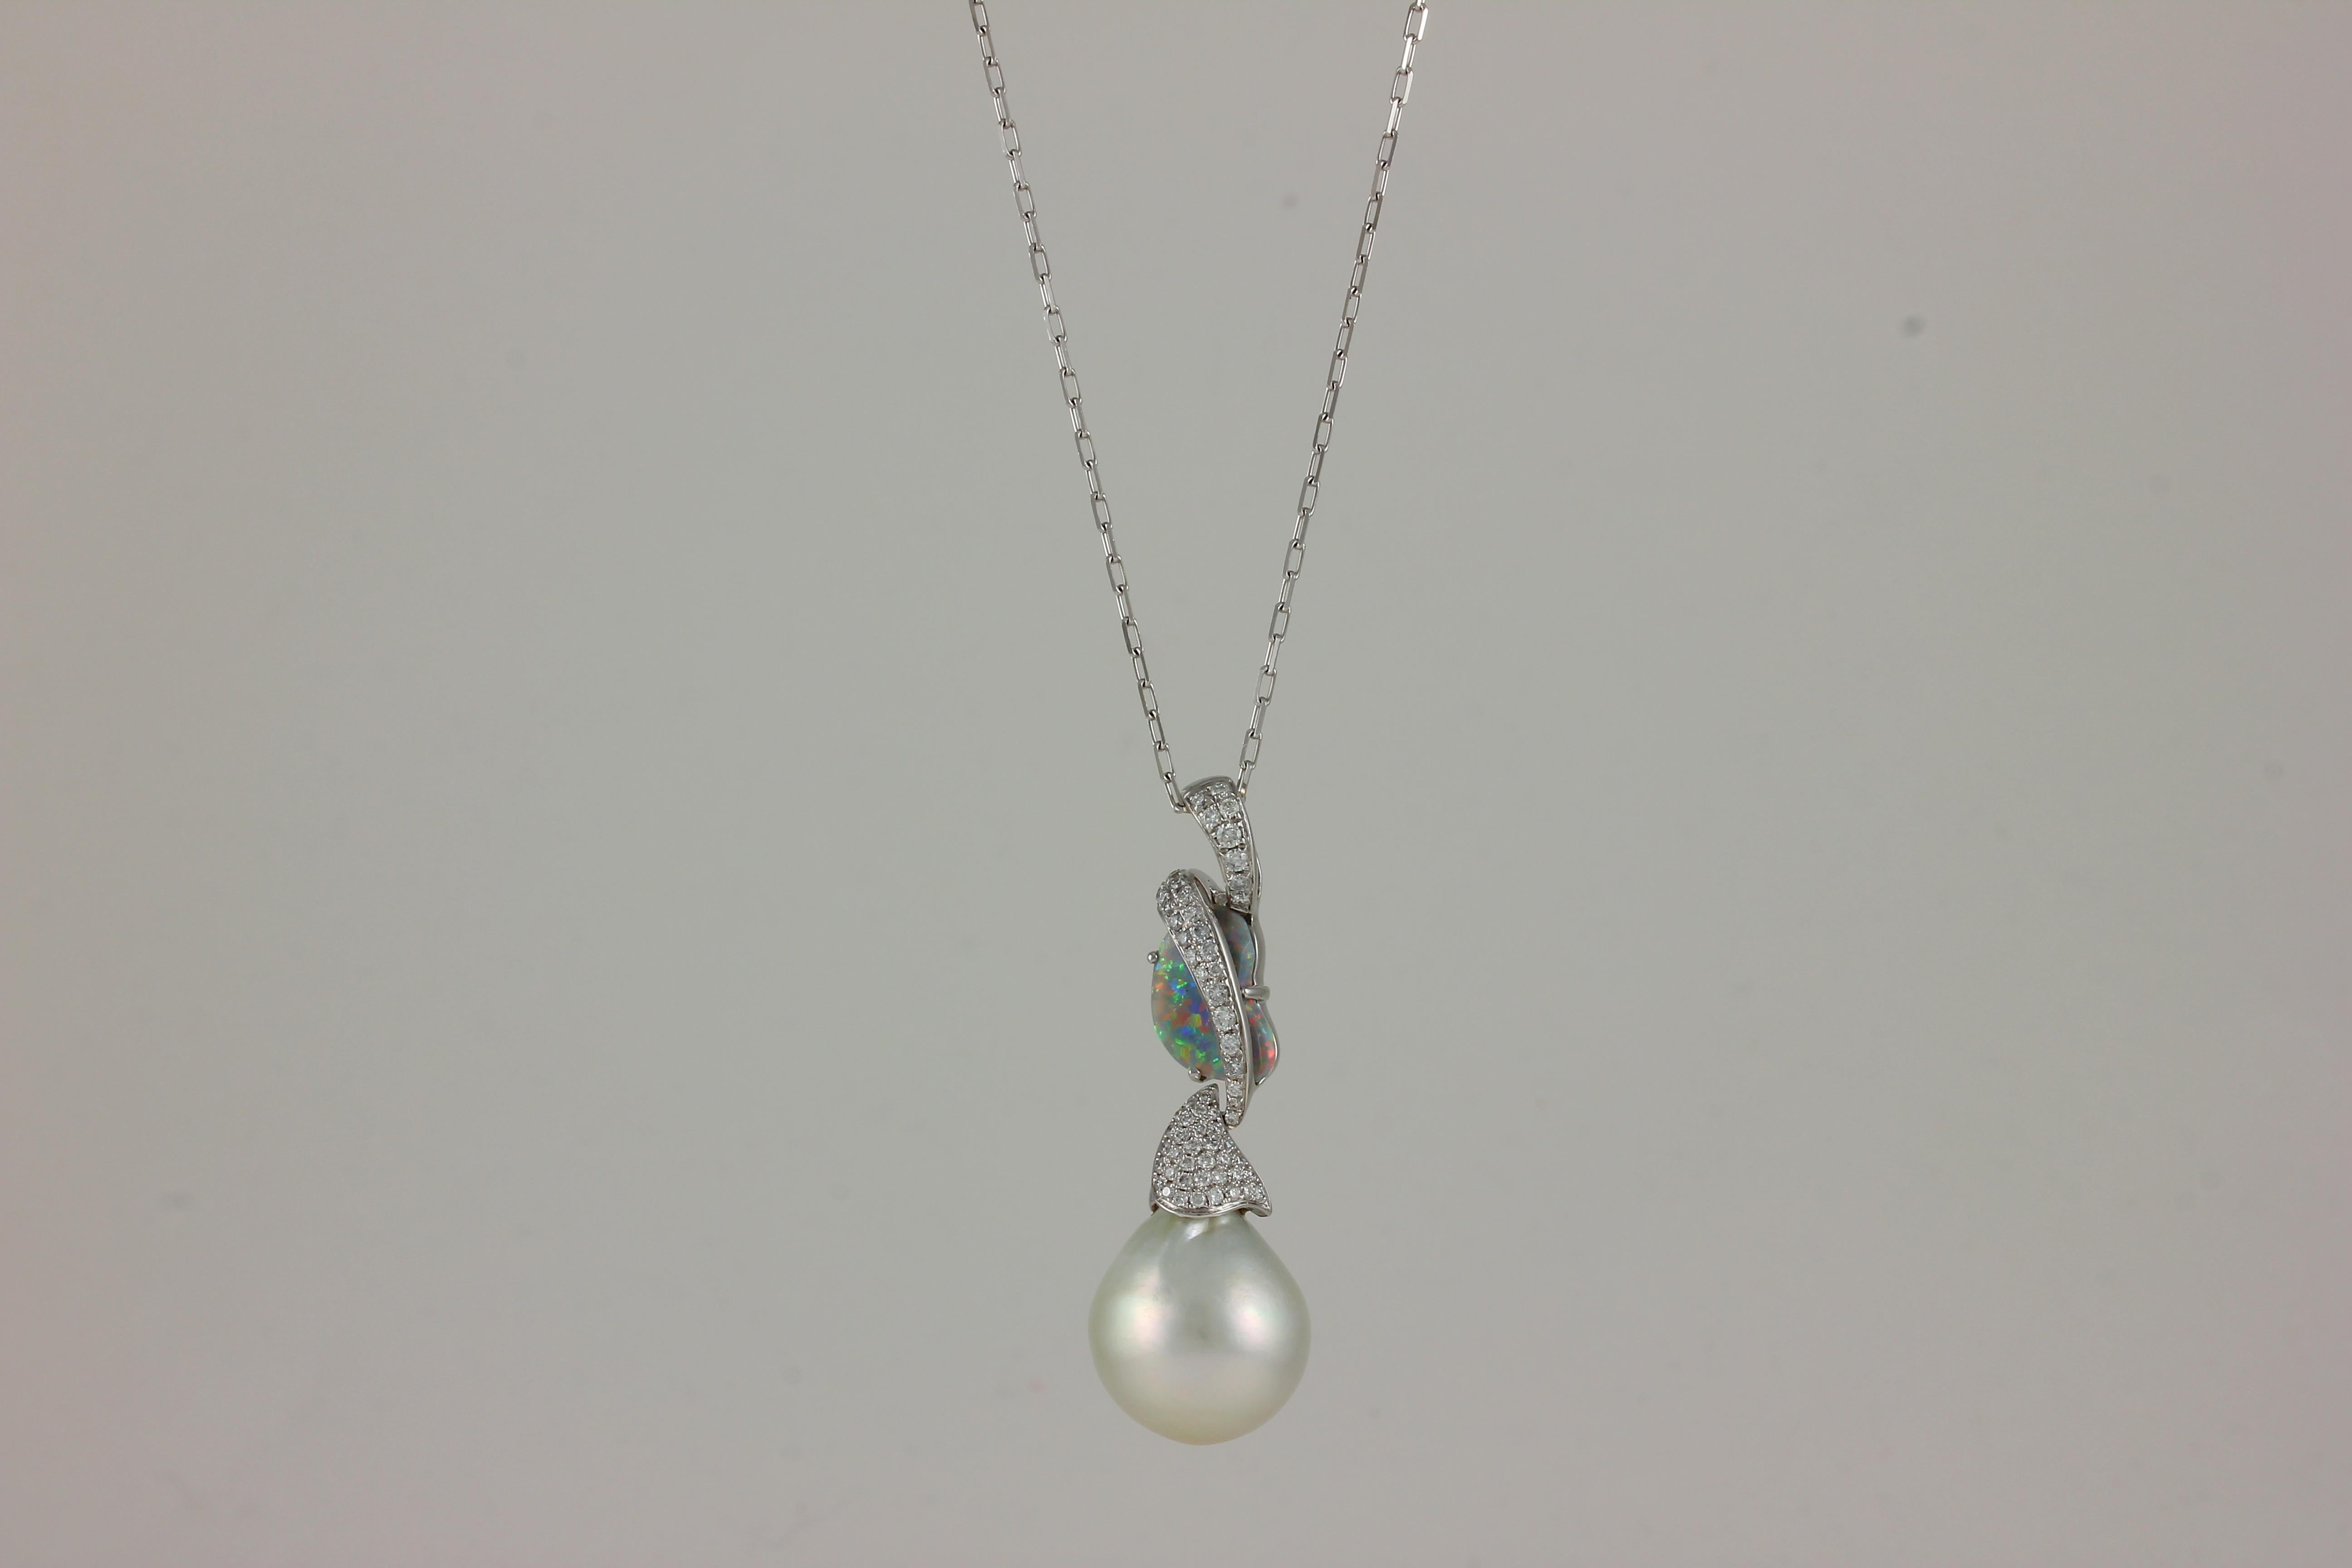 18K WG FC OPAL, PEARL AND DIAMOND ONE OF KIND WRAP PENDANT W. CHAIN
OP 1.33 Carats, 34 DIA 0.17 CARATS